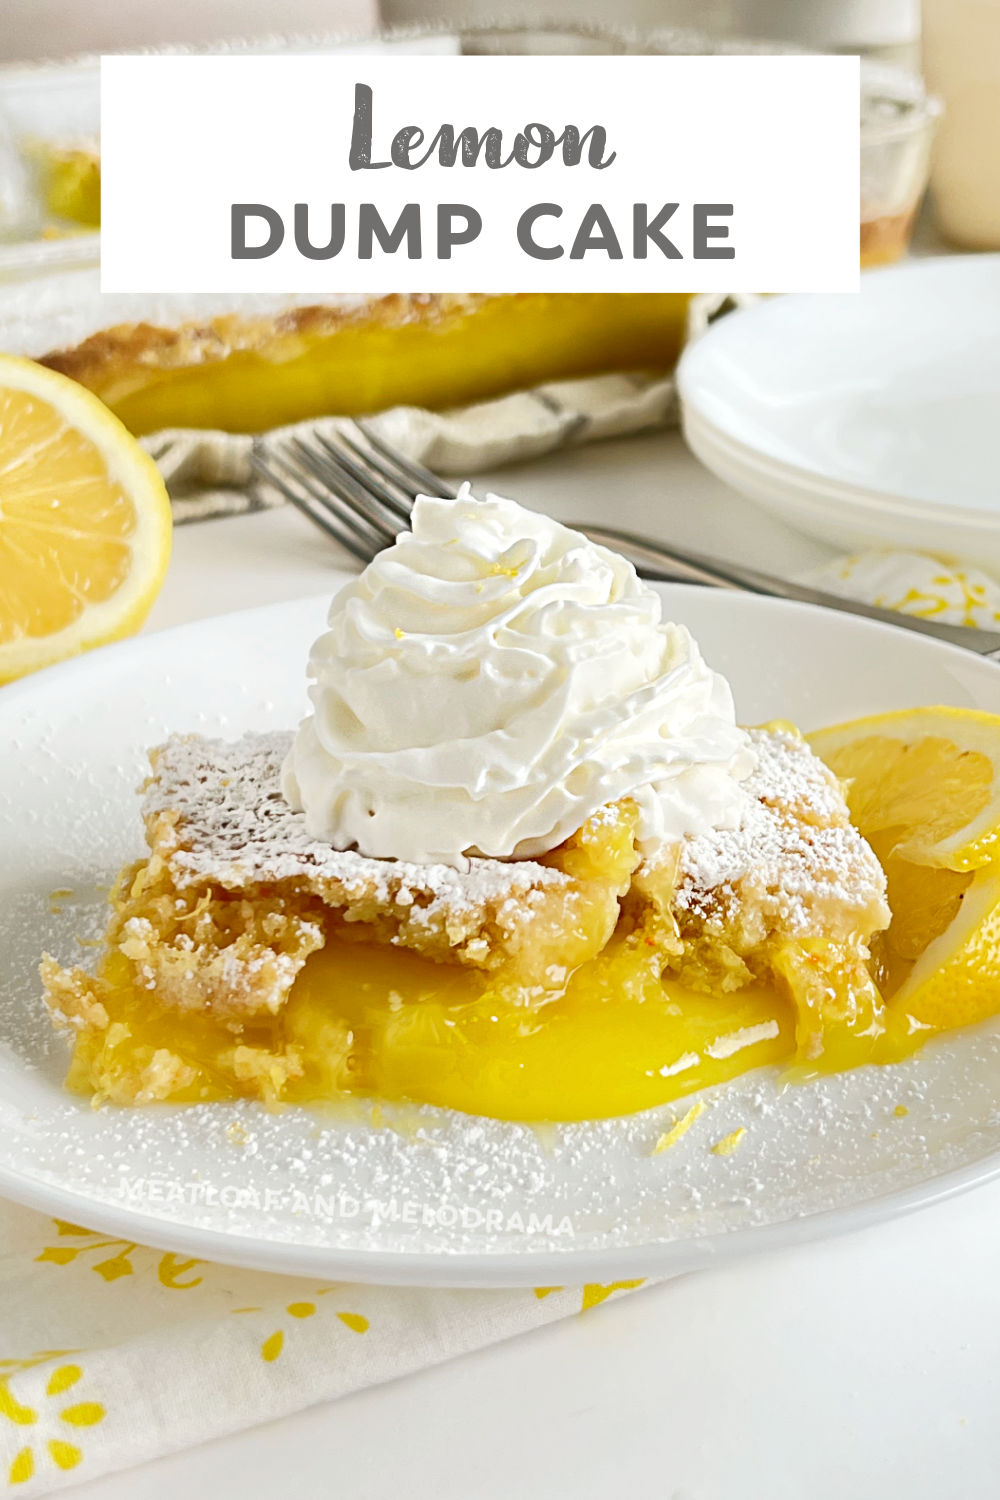 This Lemon Dump Cake recipe is an easy dessert made with yellow cake mix and lemon pie filling. Lemon lovers love this delicious dessert, and this easy dump cake recipe is sure to be a family favorite! via @meamel